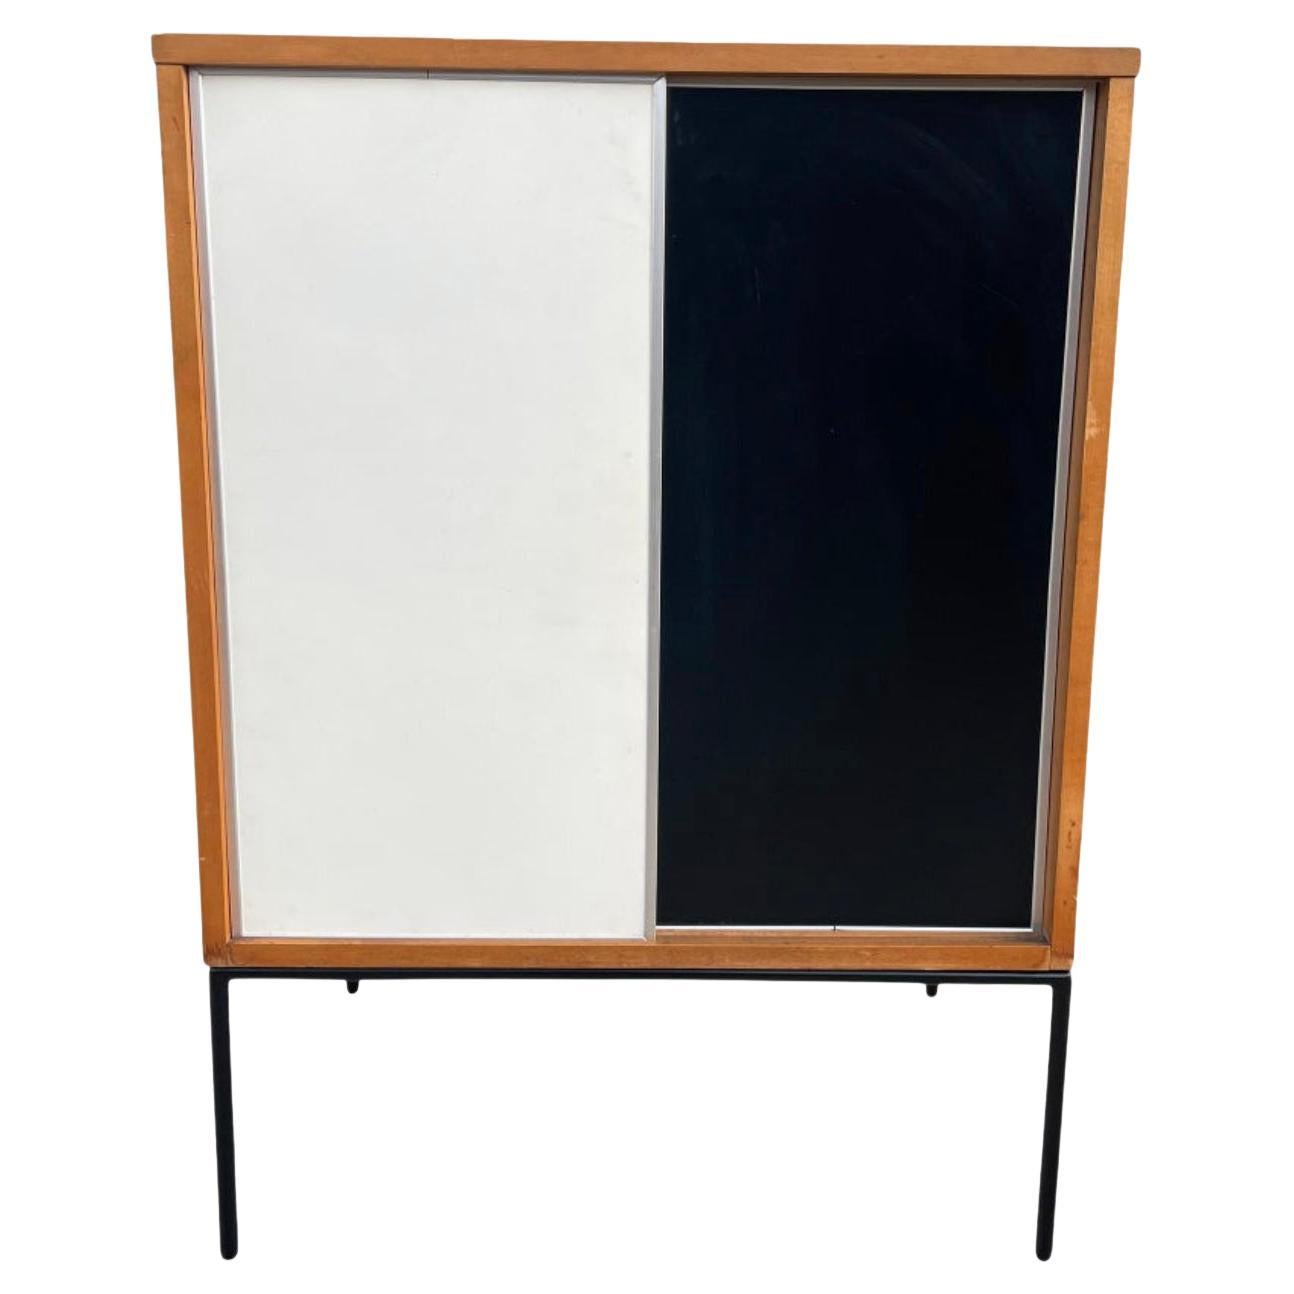 Midcentury Small Maple Cabinet by Paul McCobb Planner Group #1512 B&W Doors For Sale